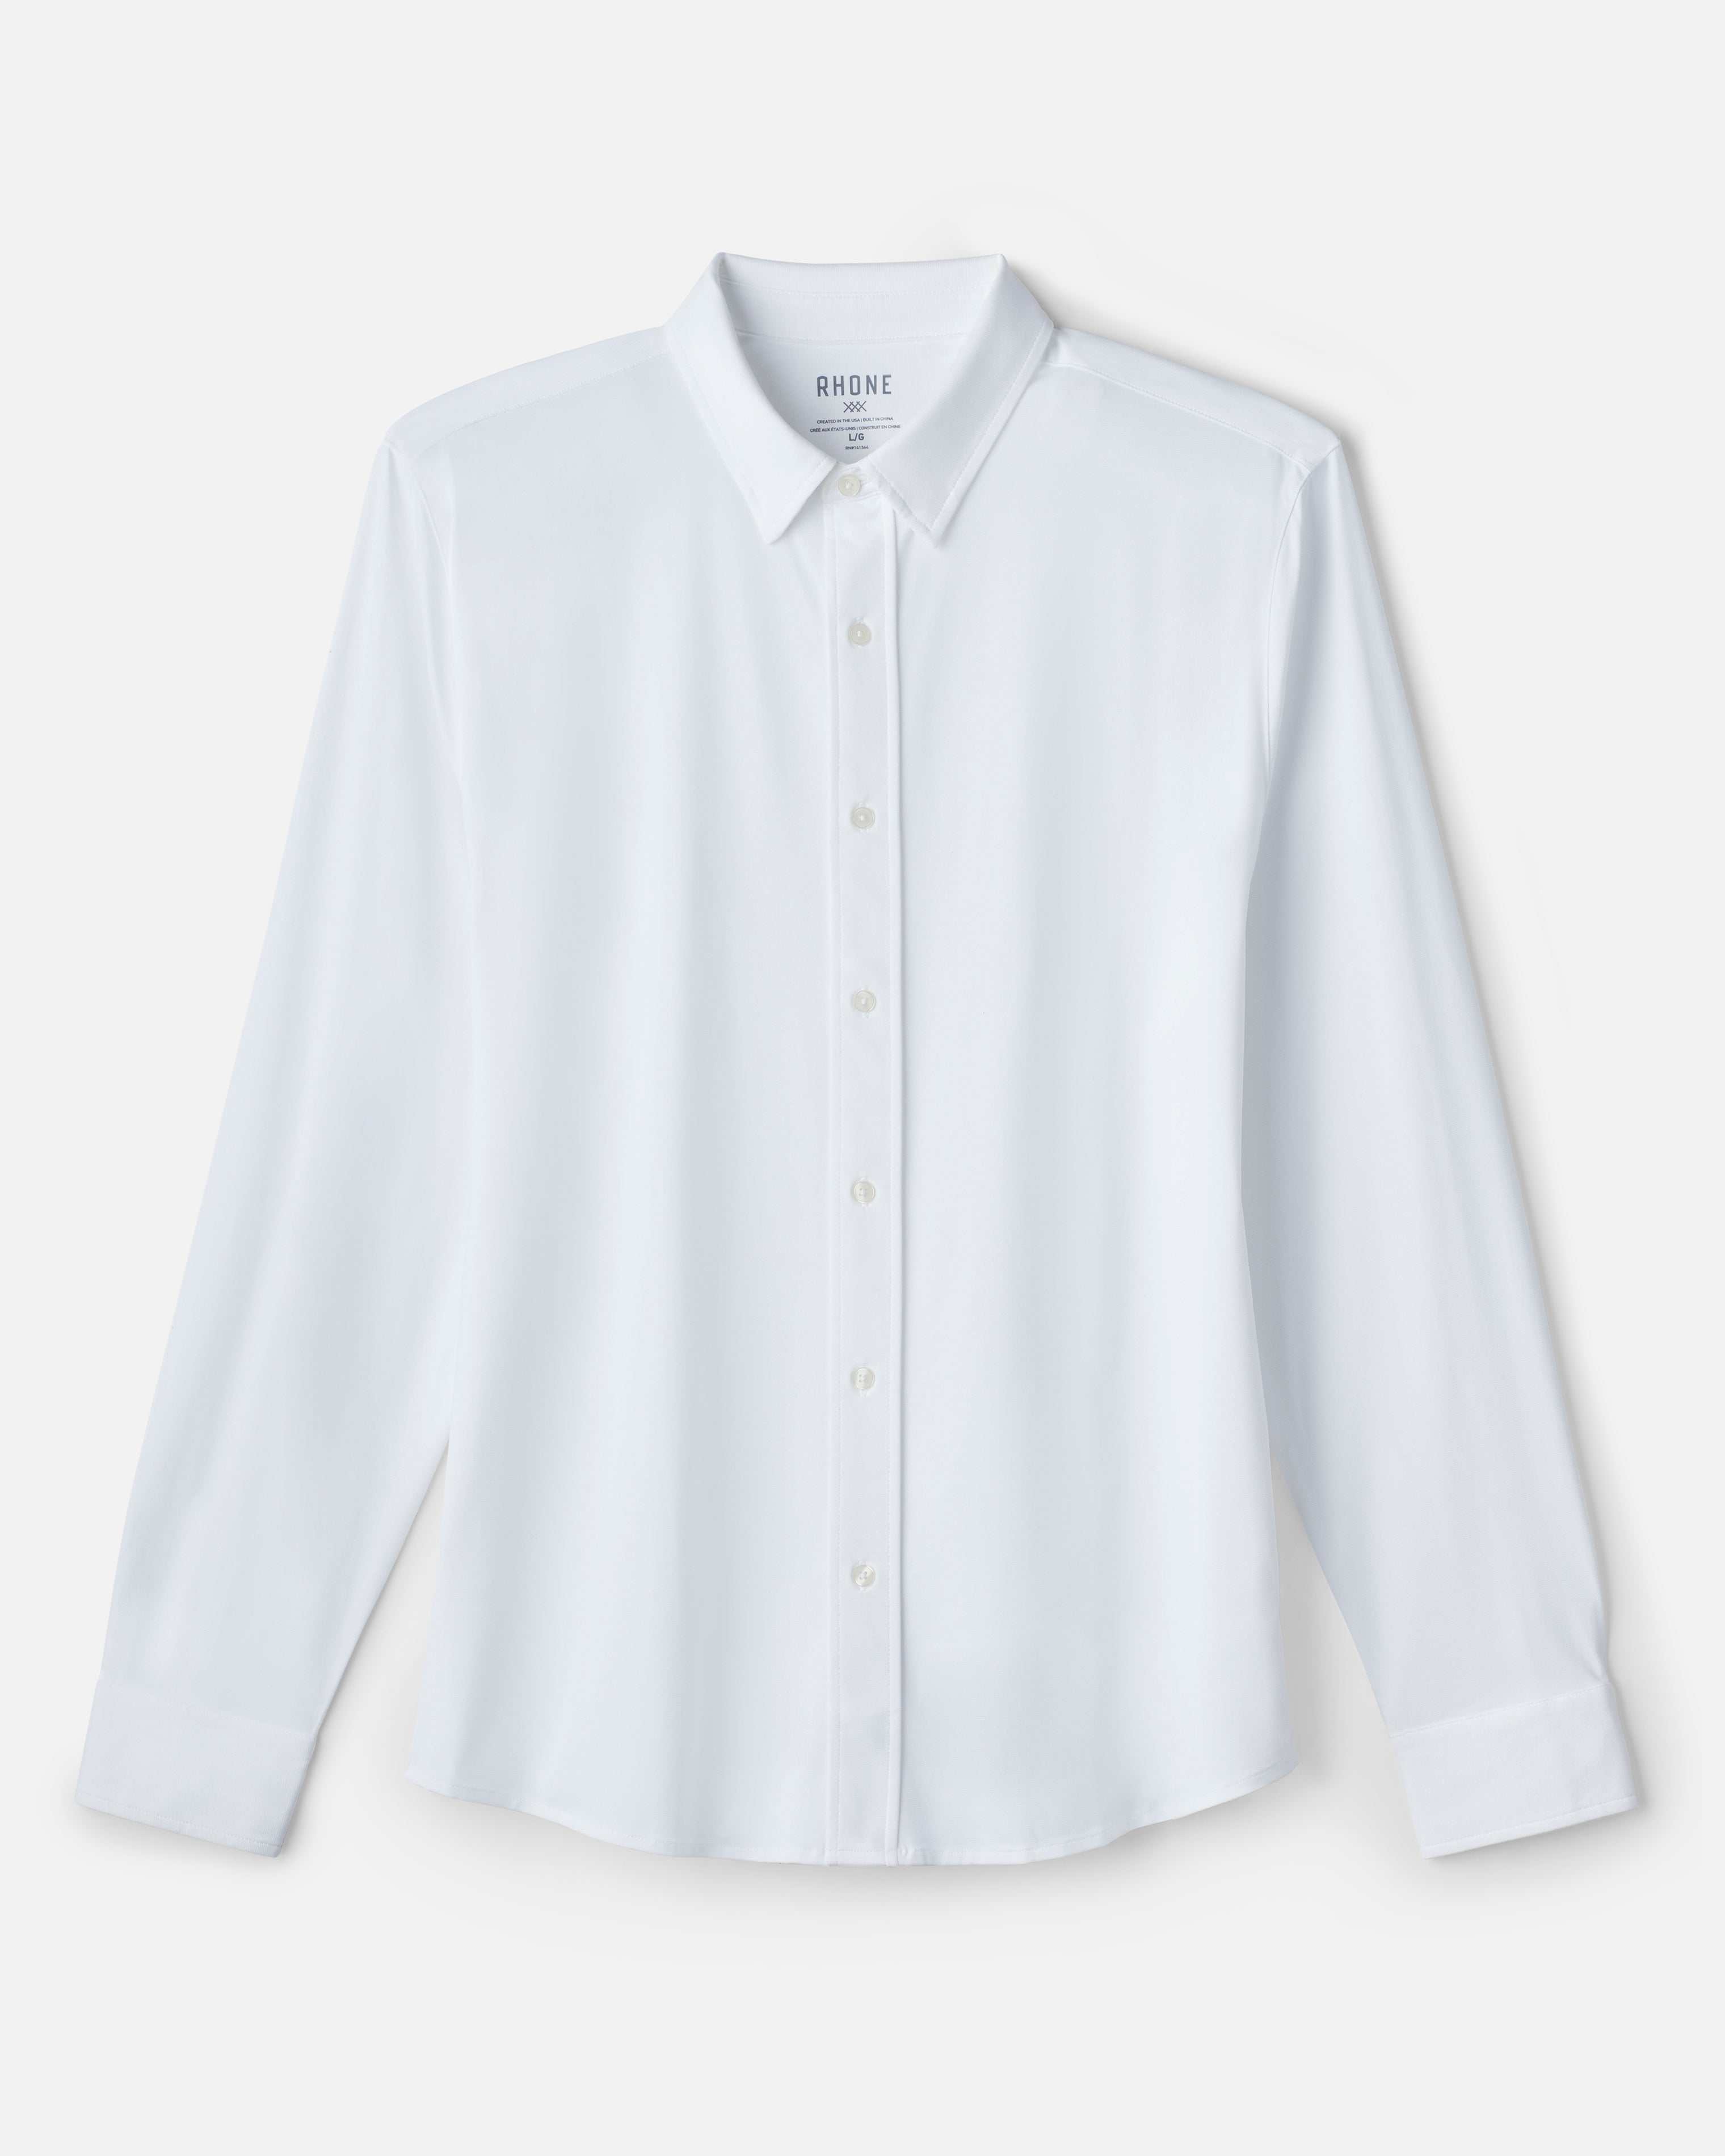 Fashionable Western Tops for Women: Stylish and Versatile Shirts for Every  Occasion plain long shirts